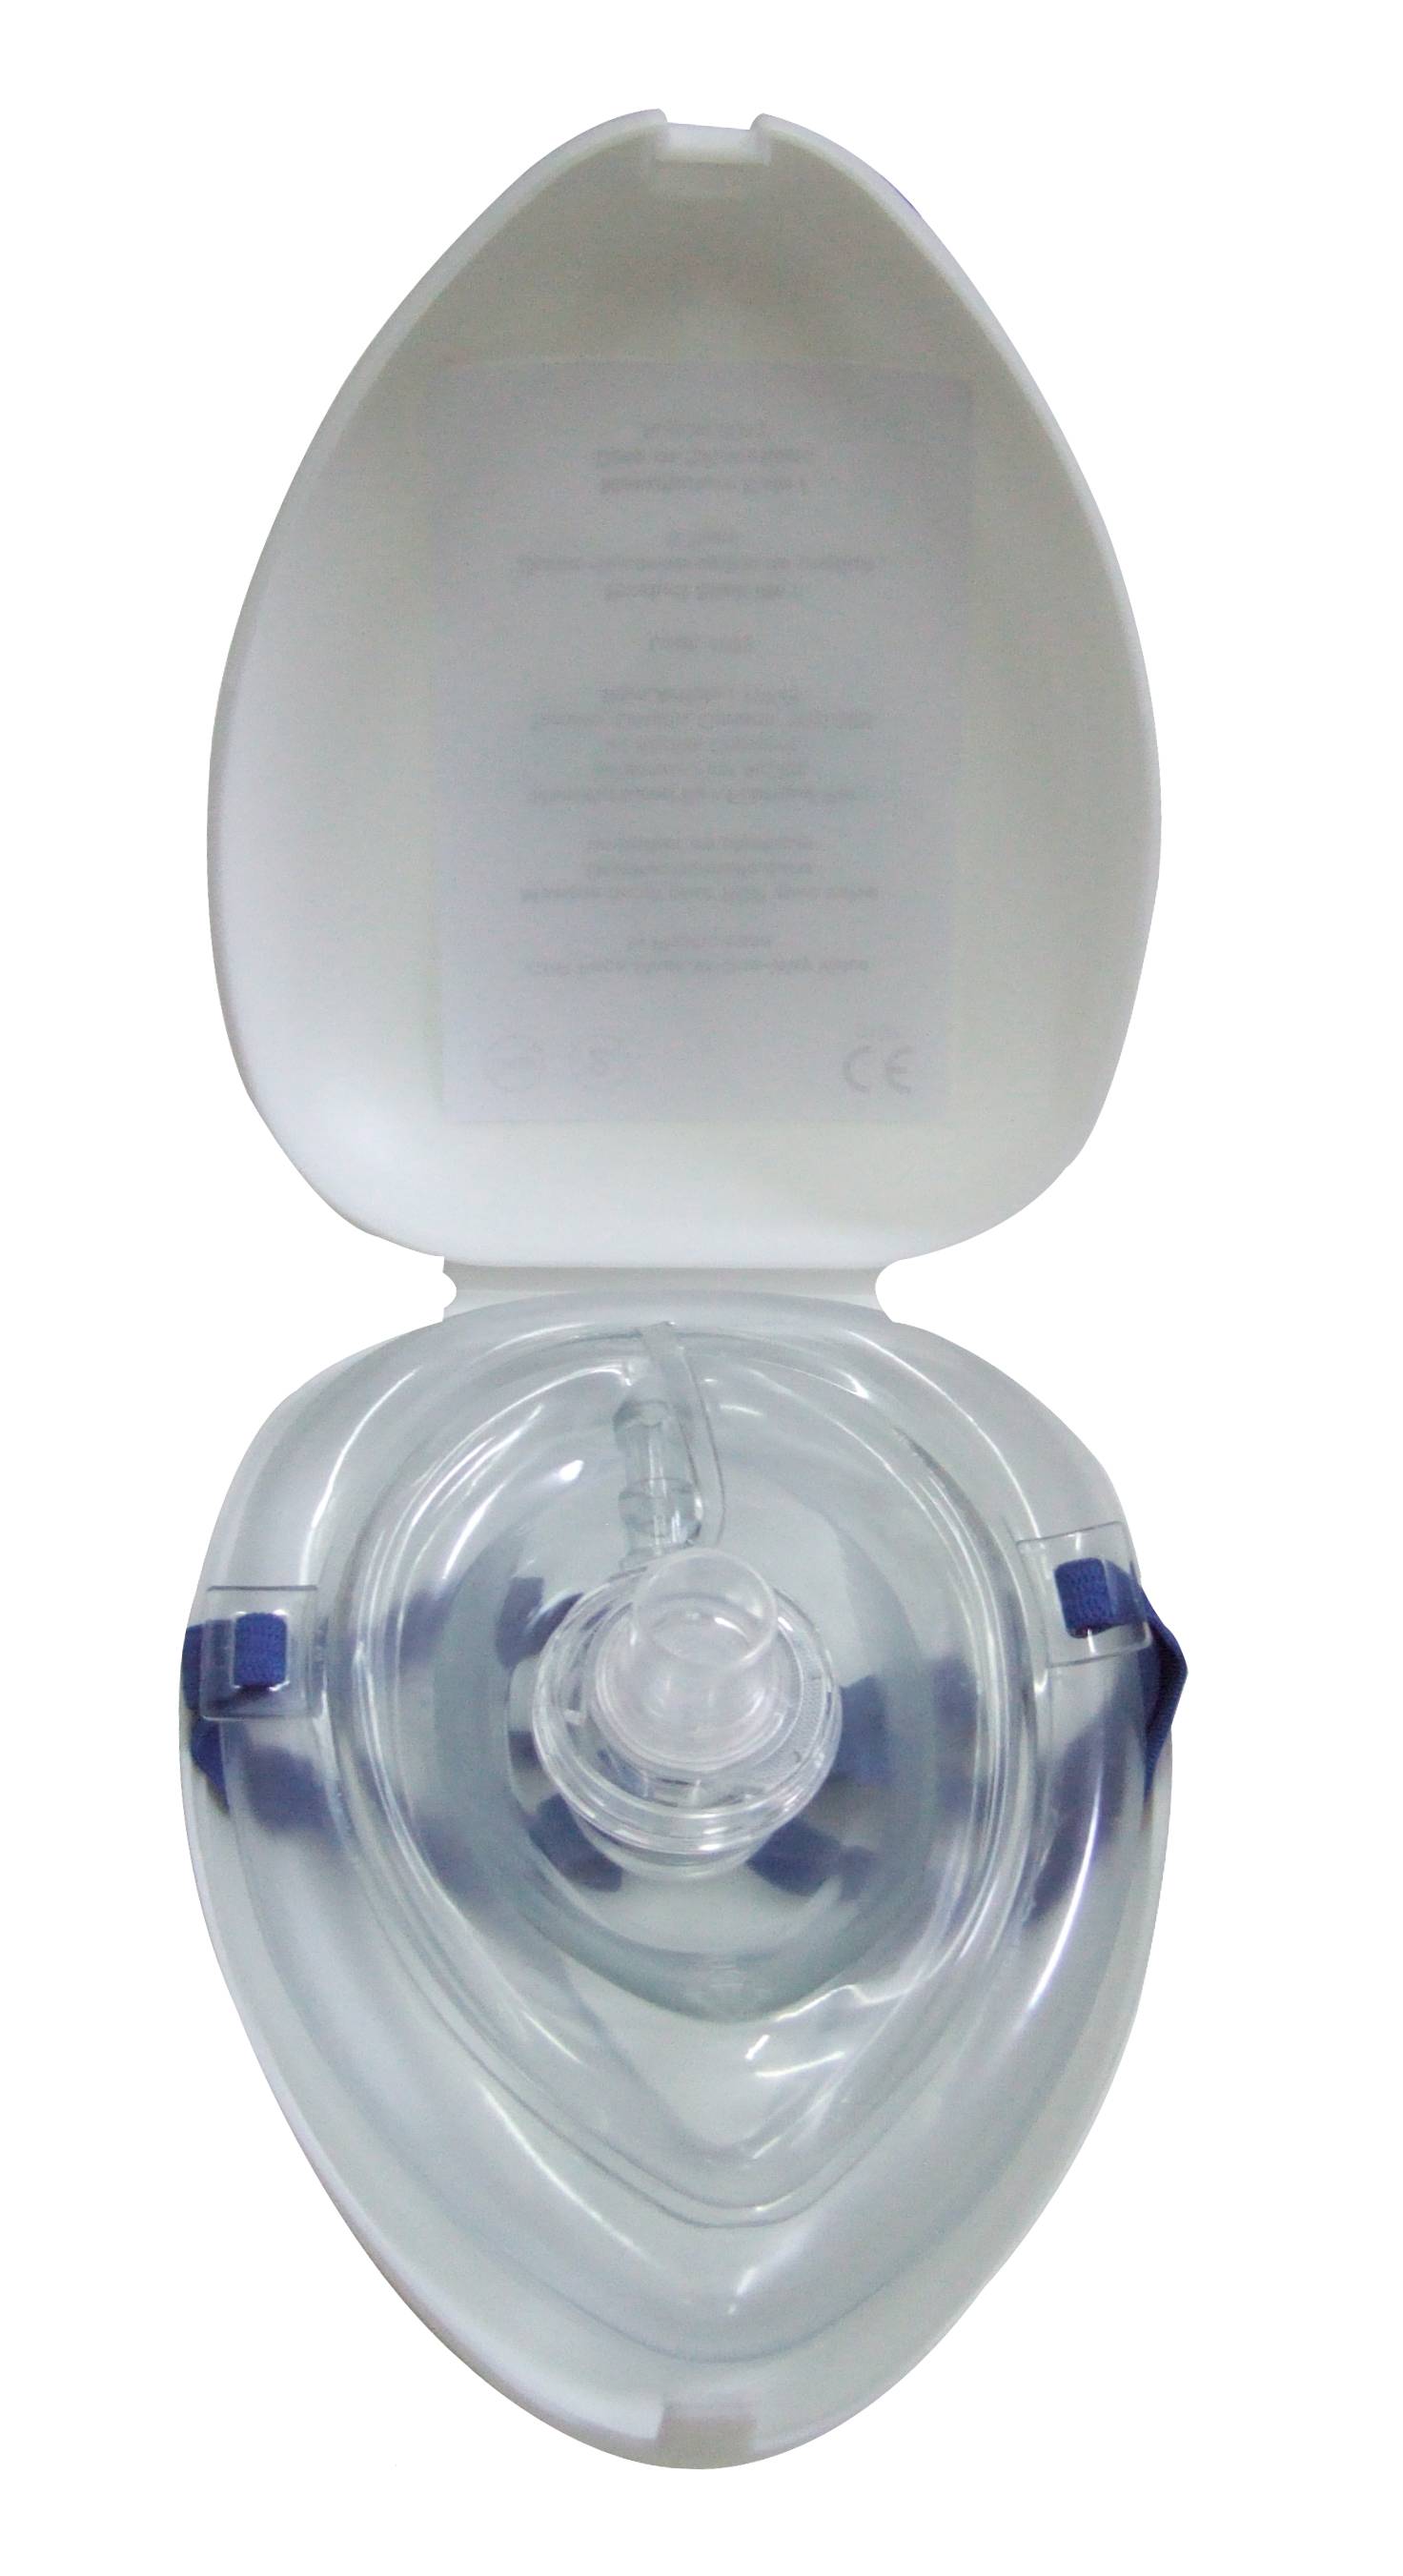 Resuscitation (CPR) mask with one-way valve and rigid case.